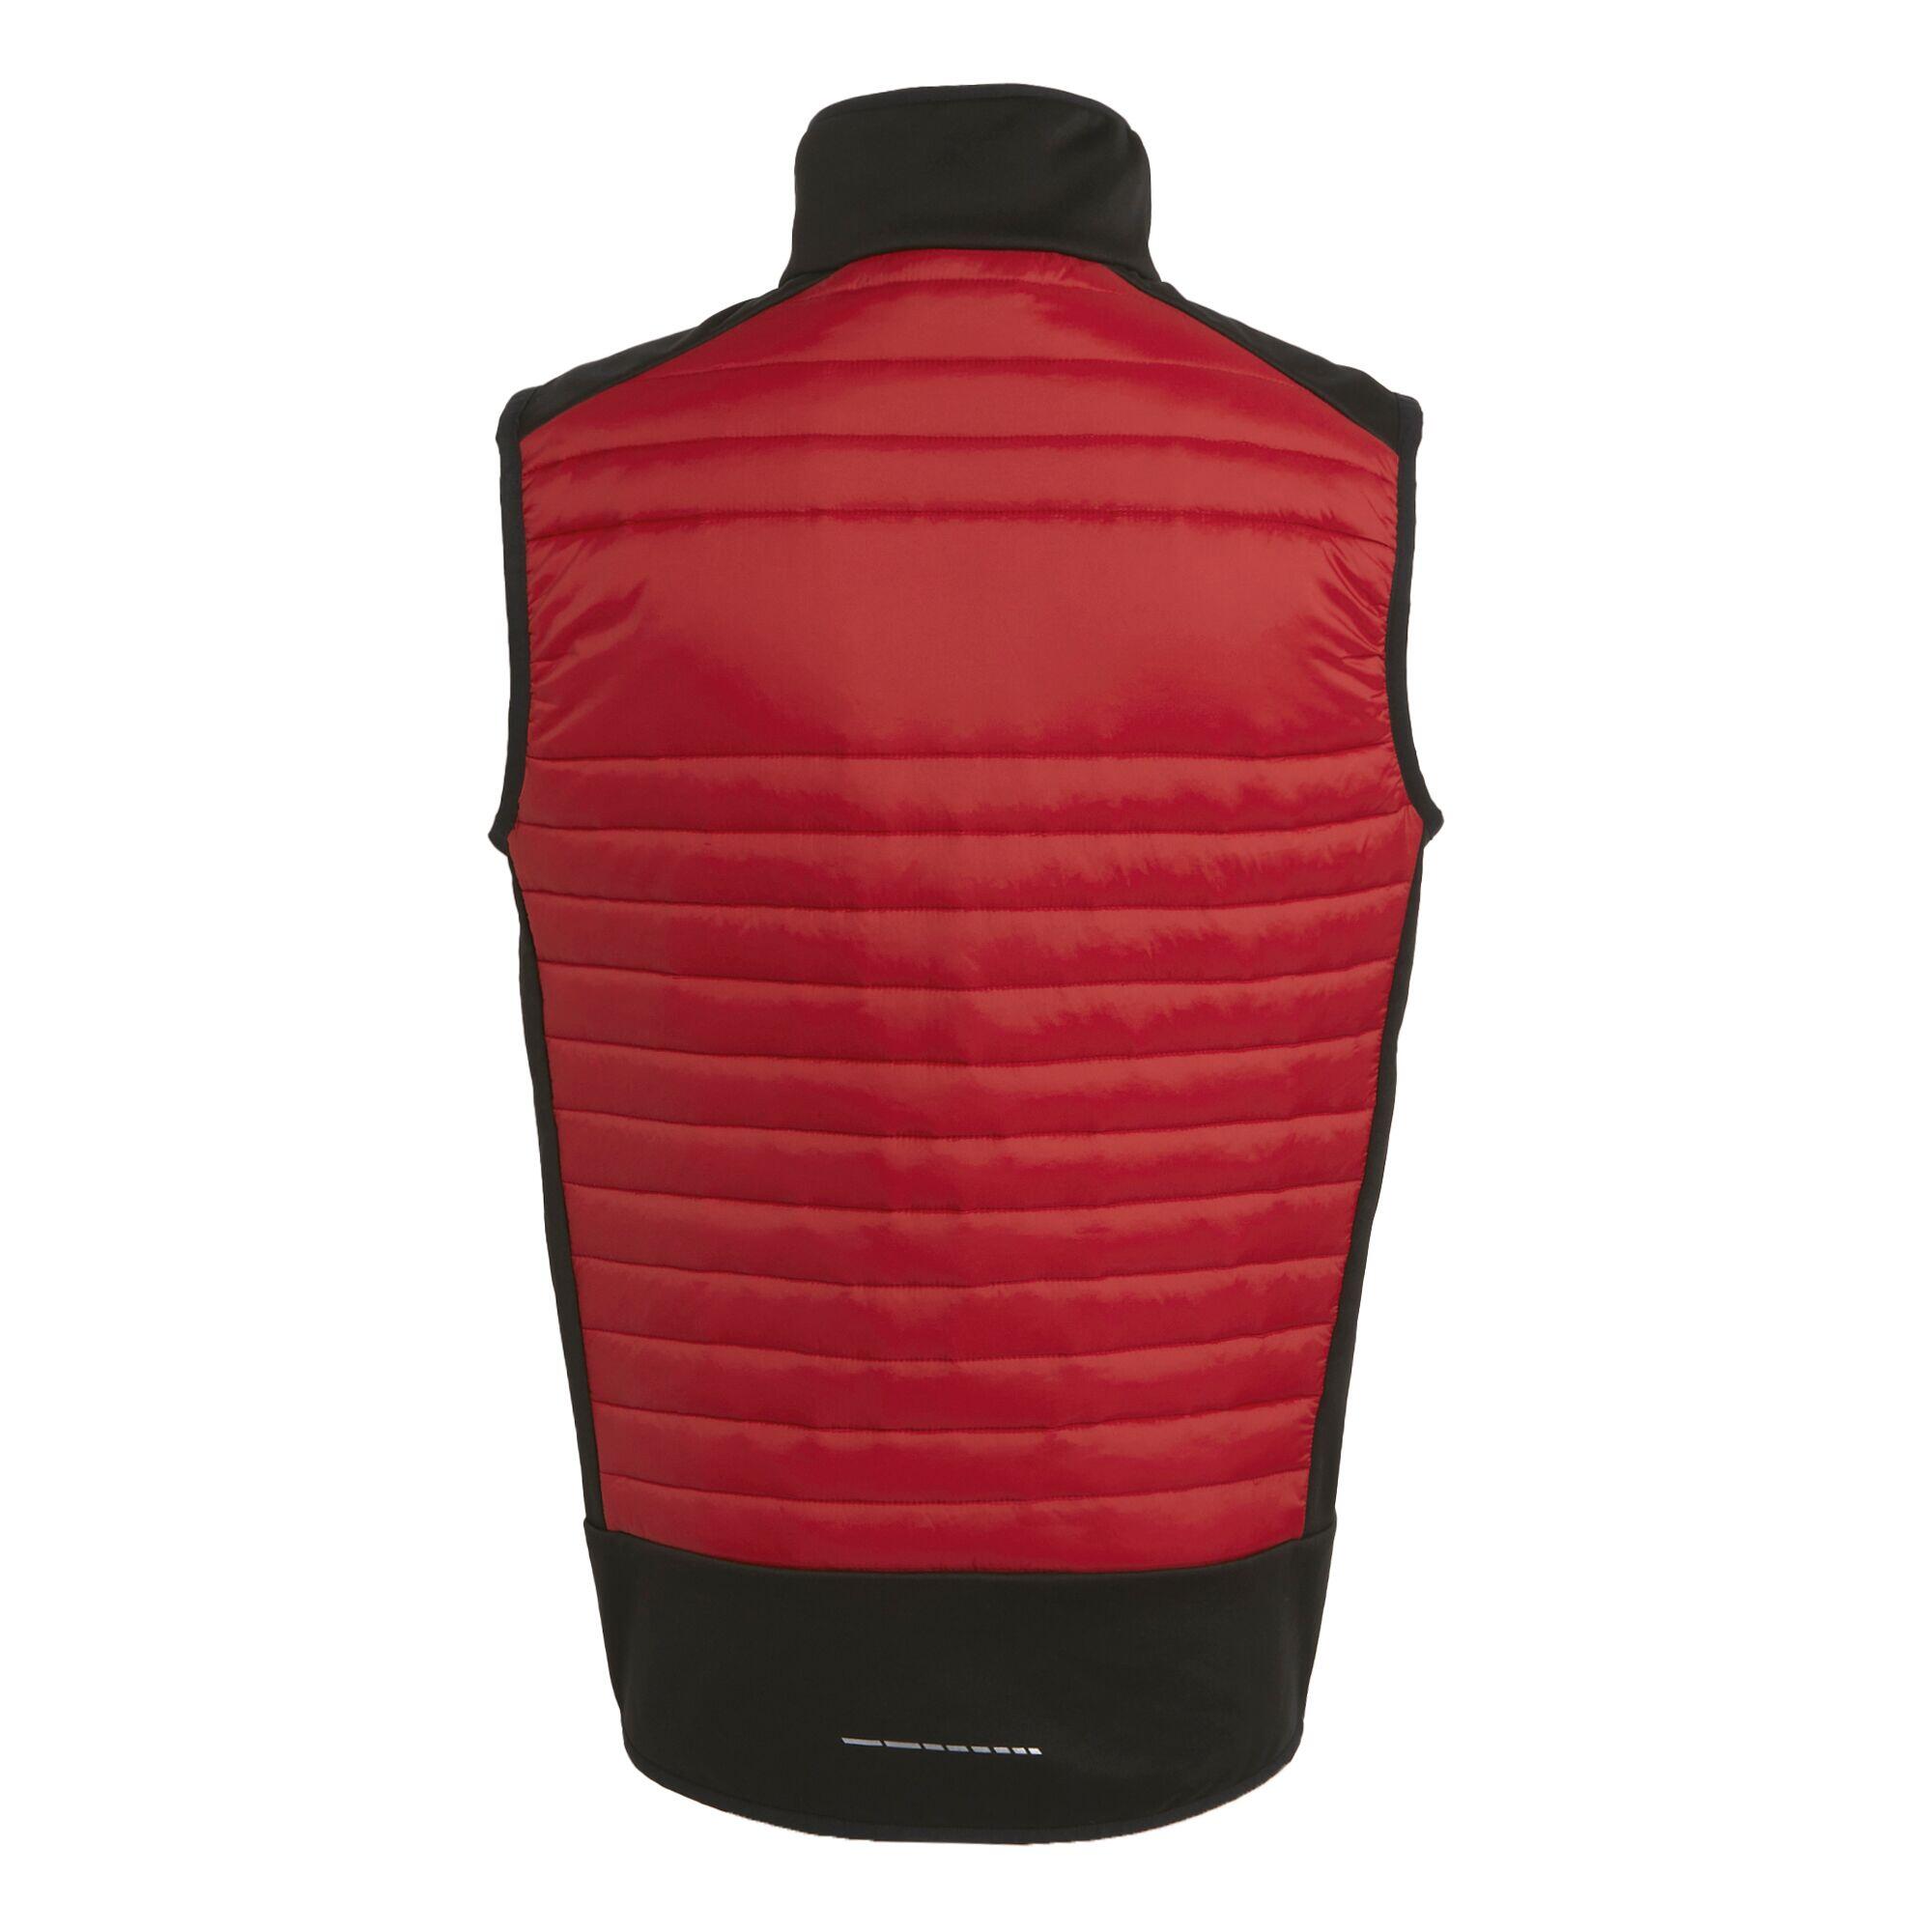 Unisex Adult EVolve Thermal Hybrid Body Warmer (Classic Red/Black) 2/5